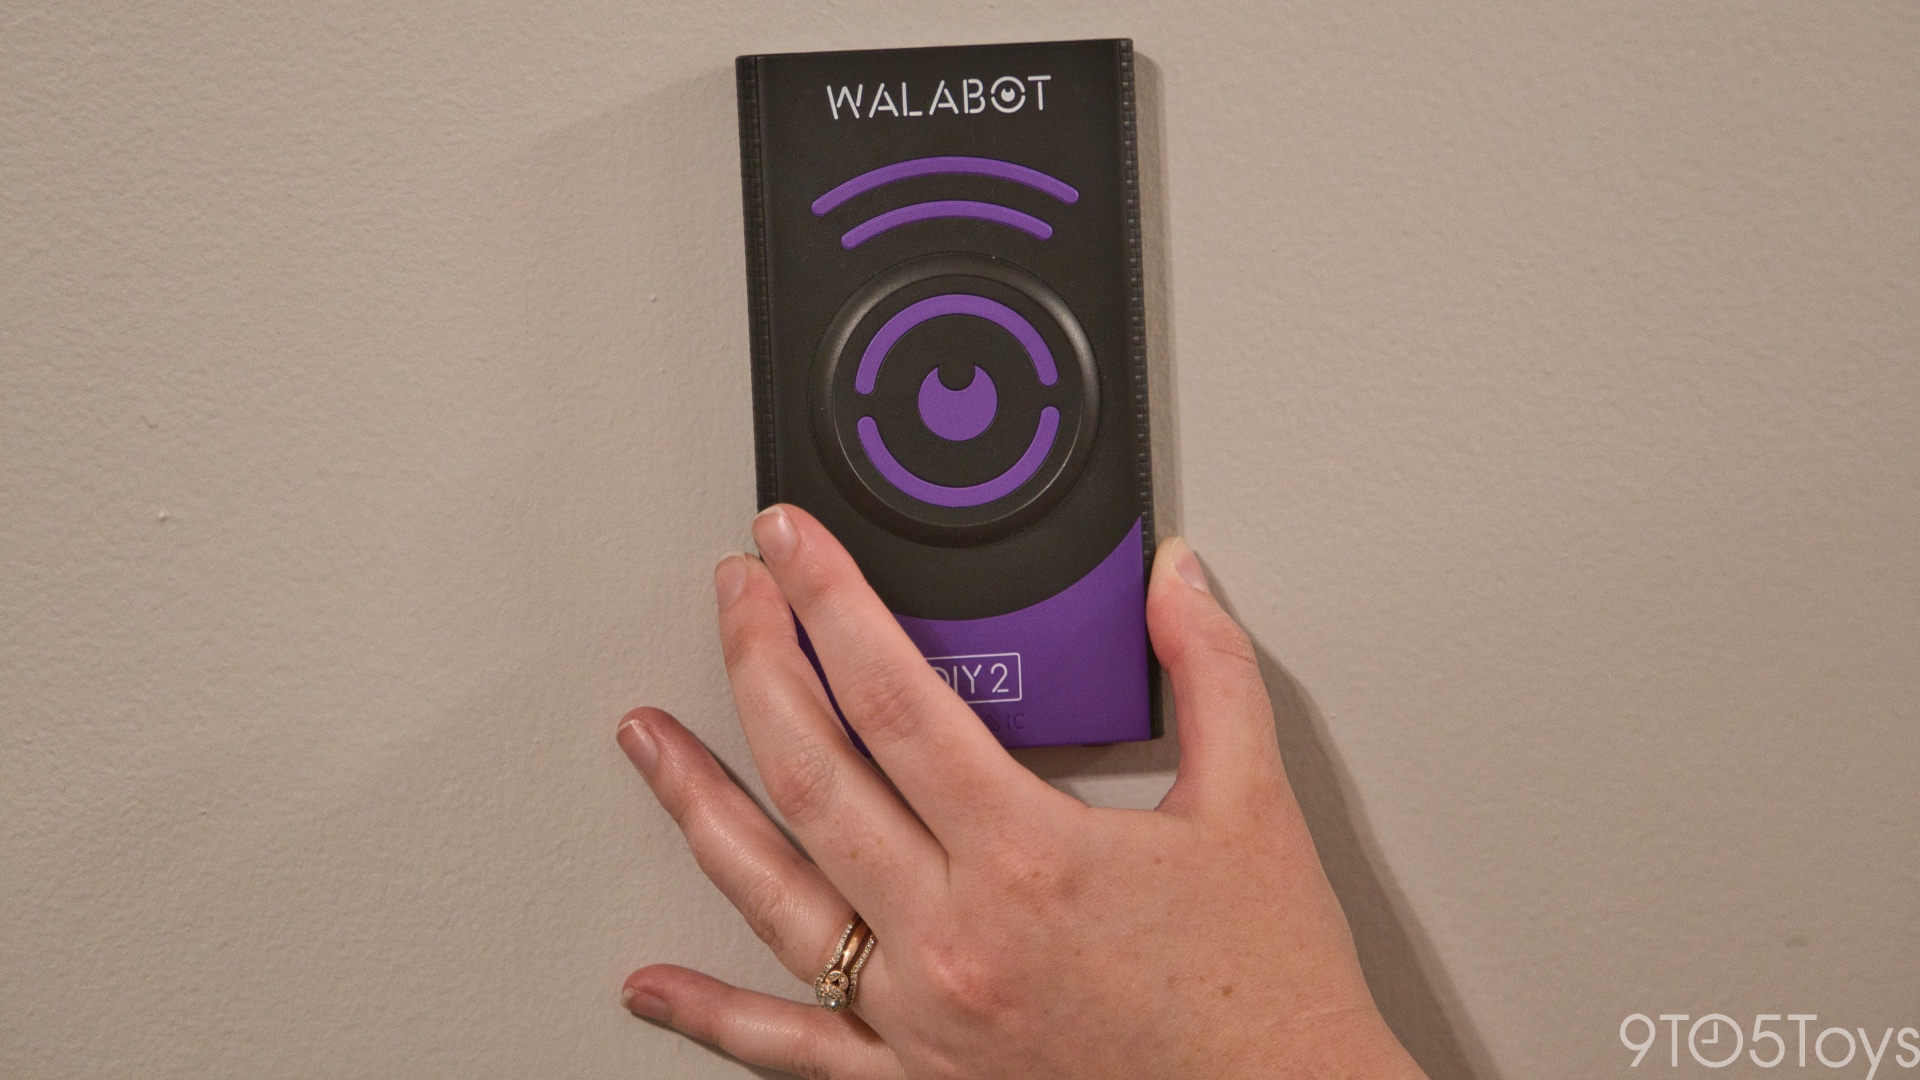 Walls are x-rayed with Walabot wall scanners